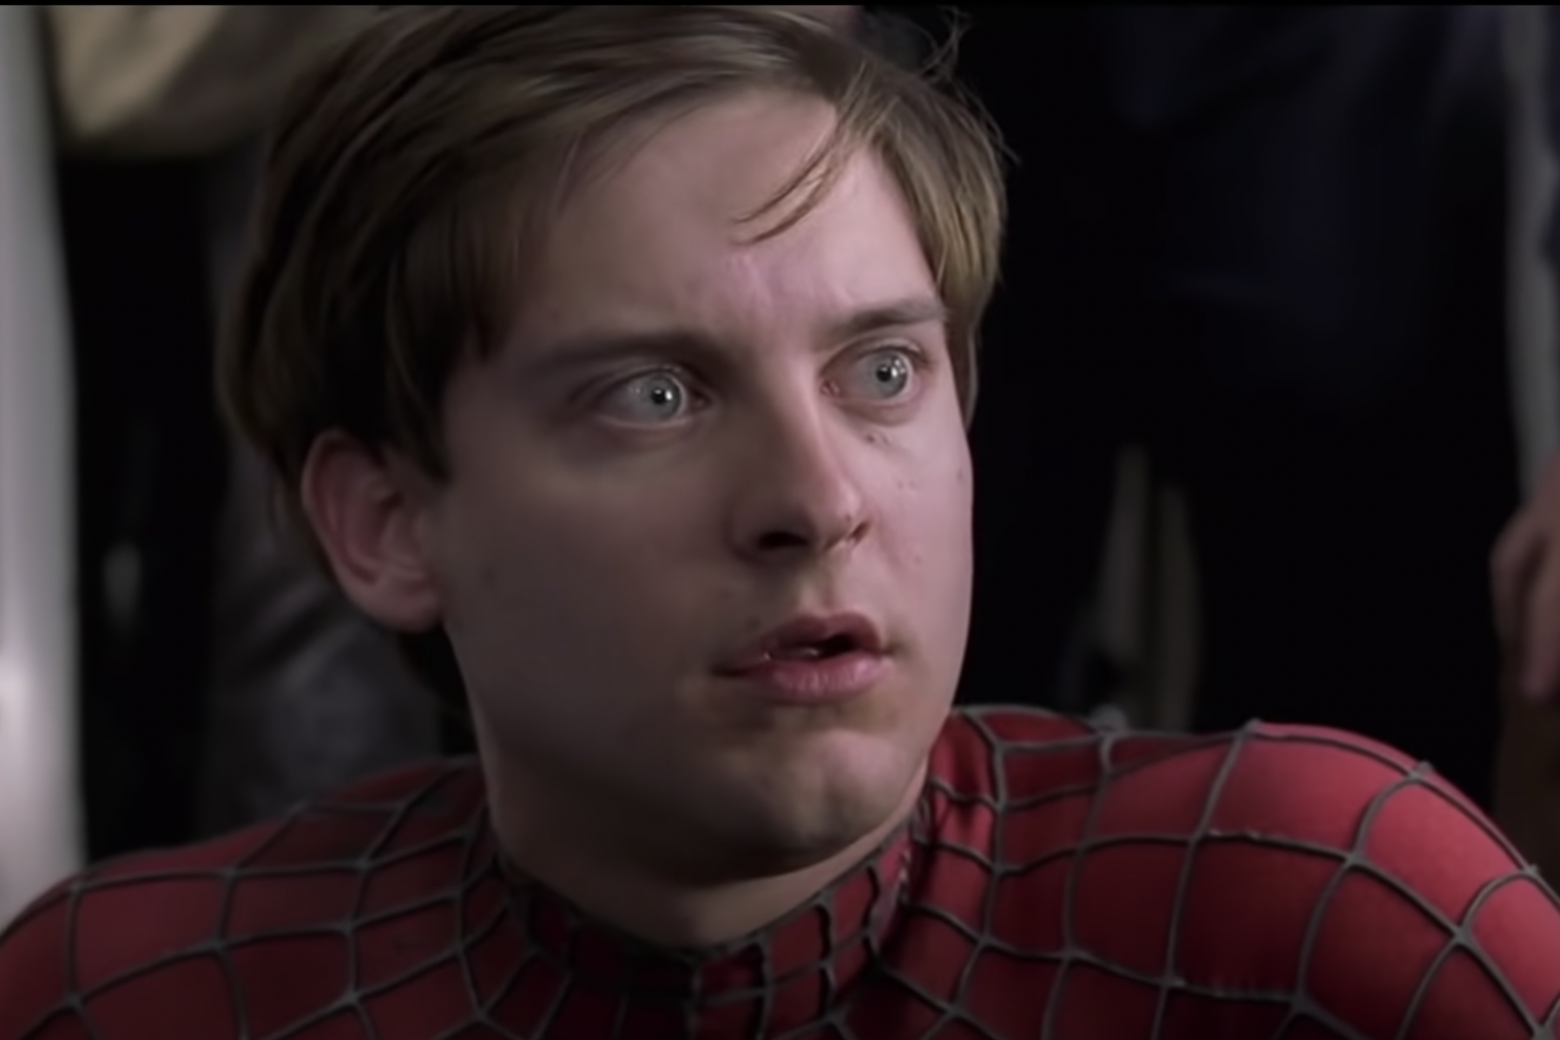 Spider-Man 2: How the train scene channeled post-9/11 grief.